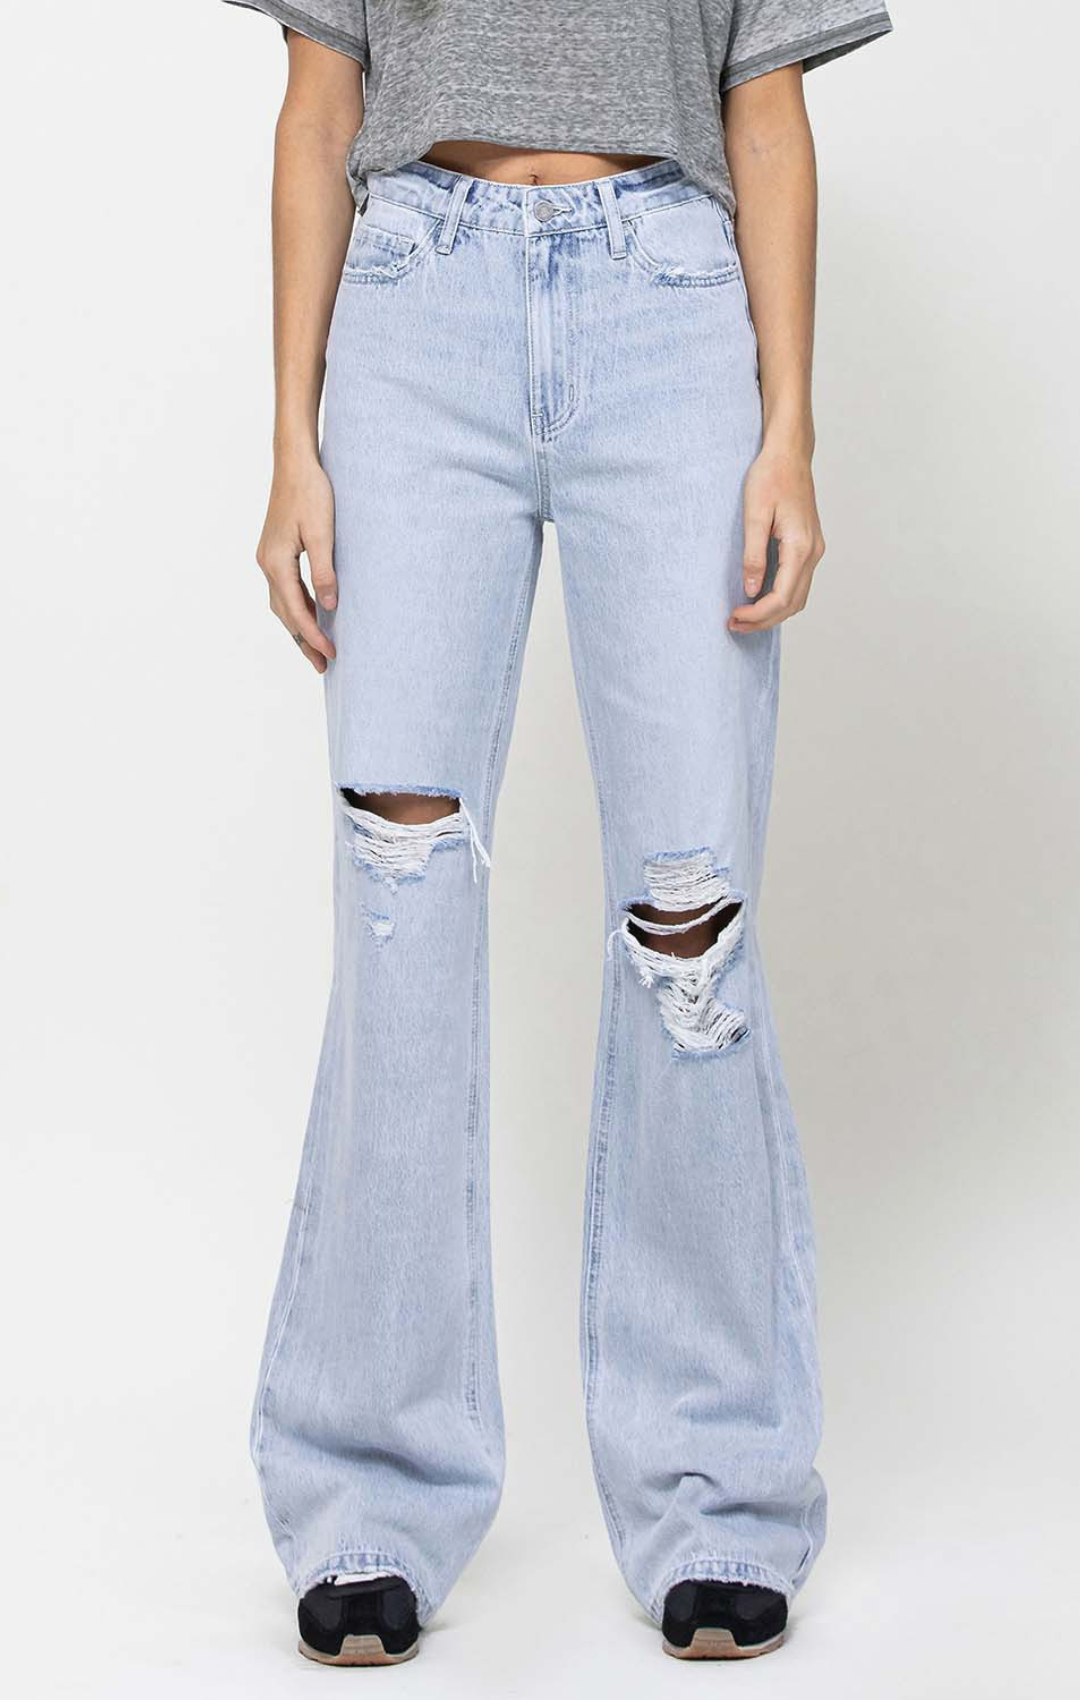 90s High Rise Flare Jean by Vervet